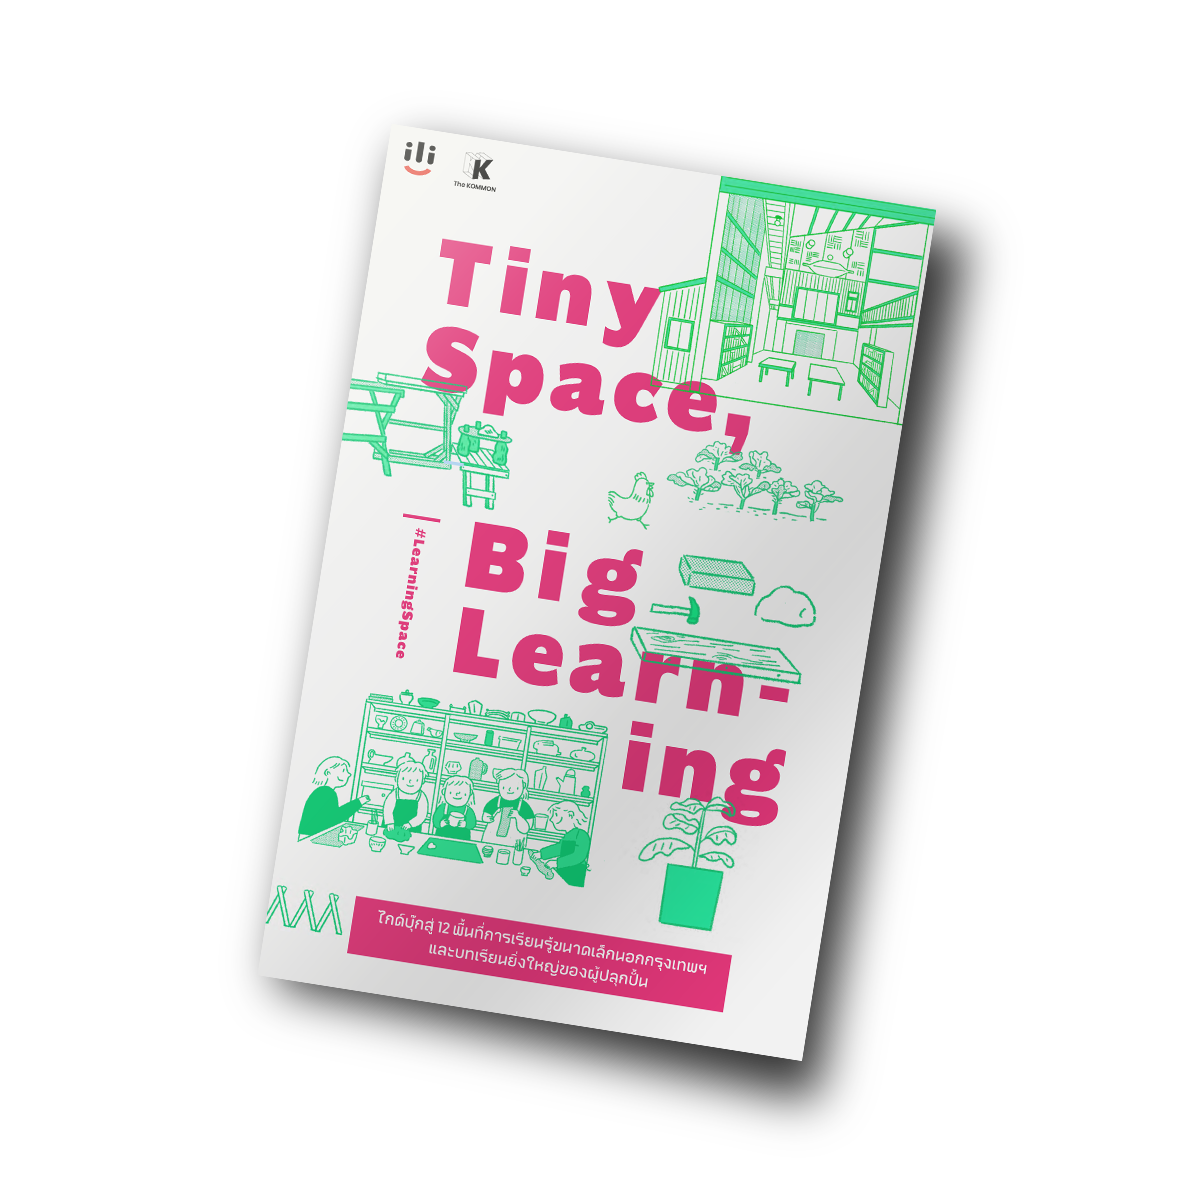 Tiny Space Big Learning